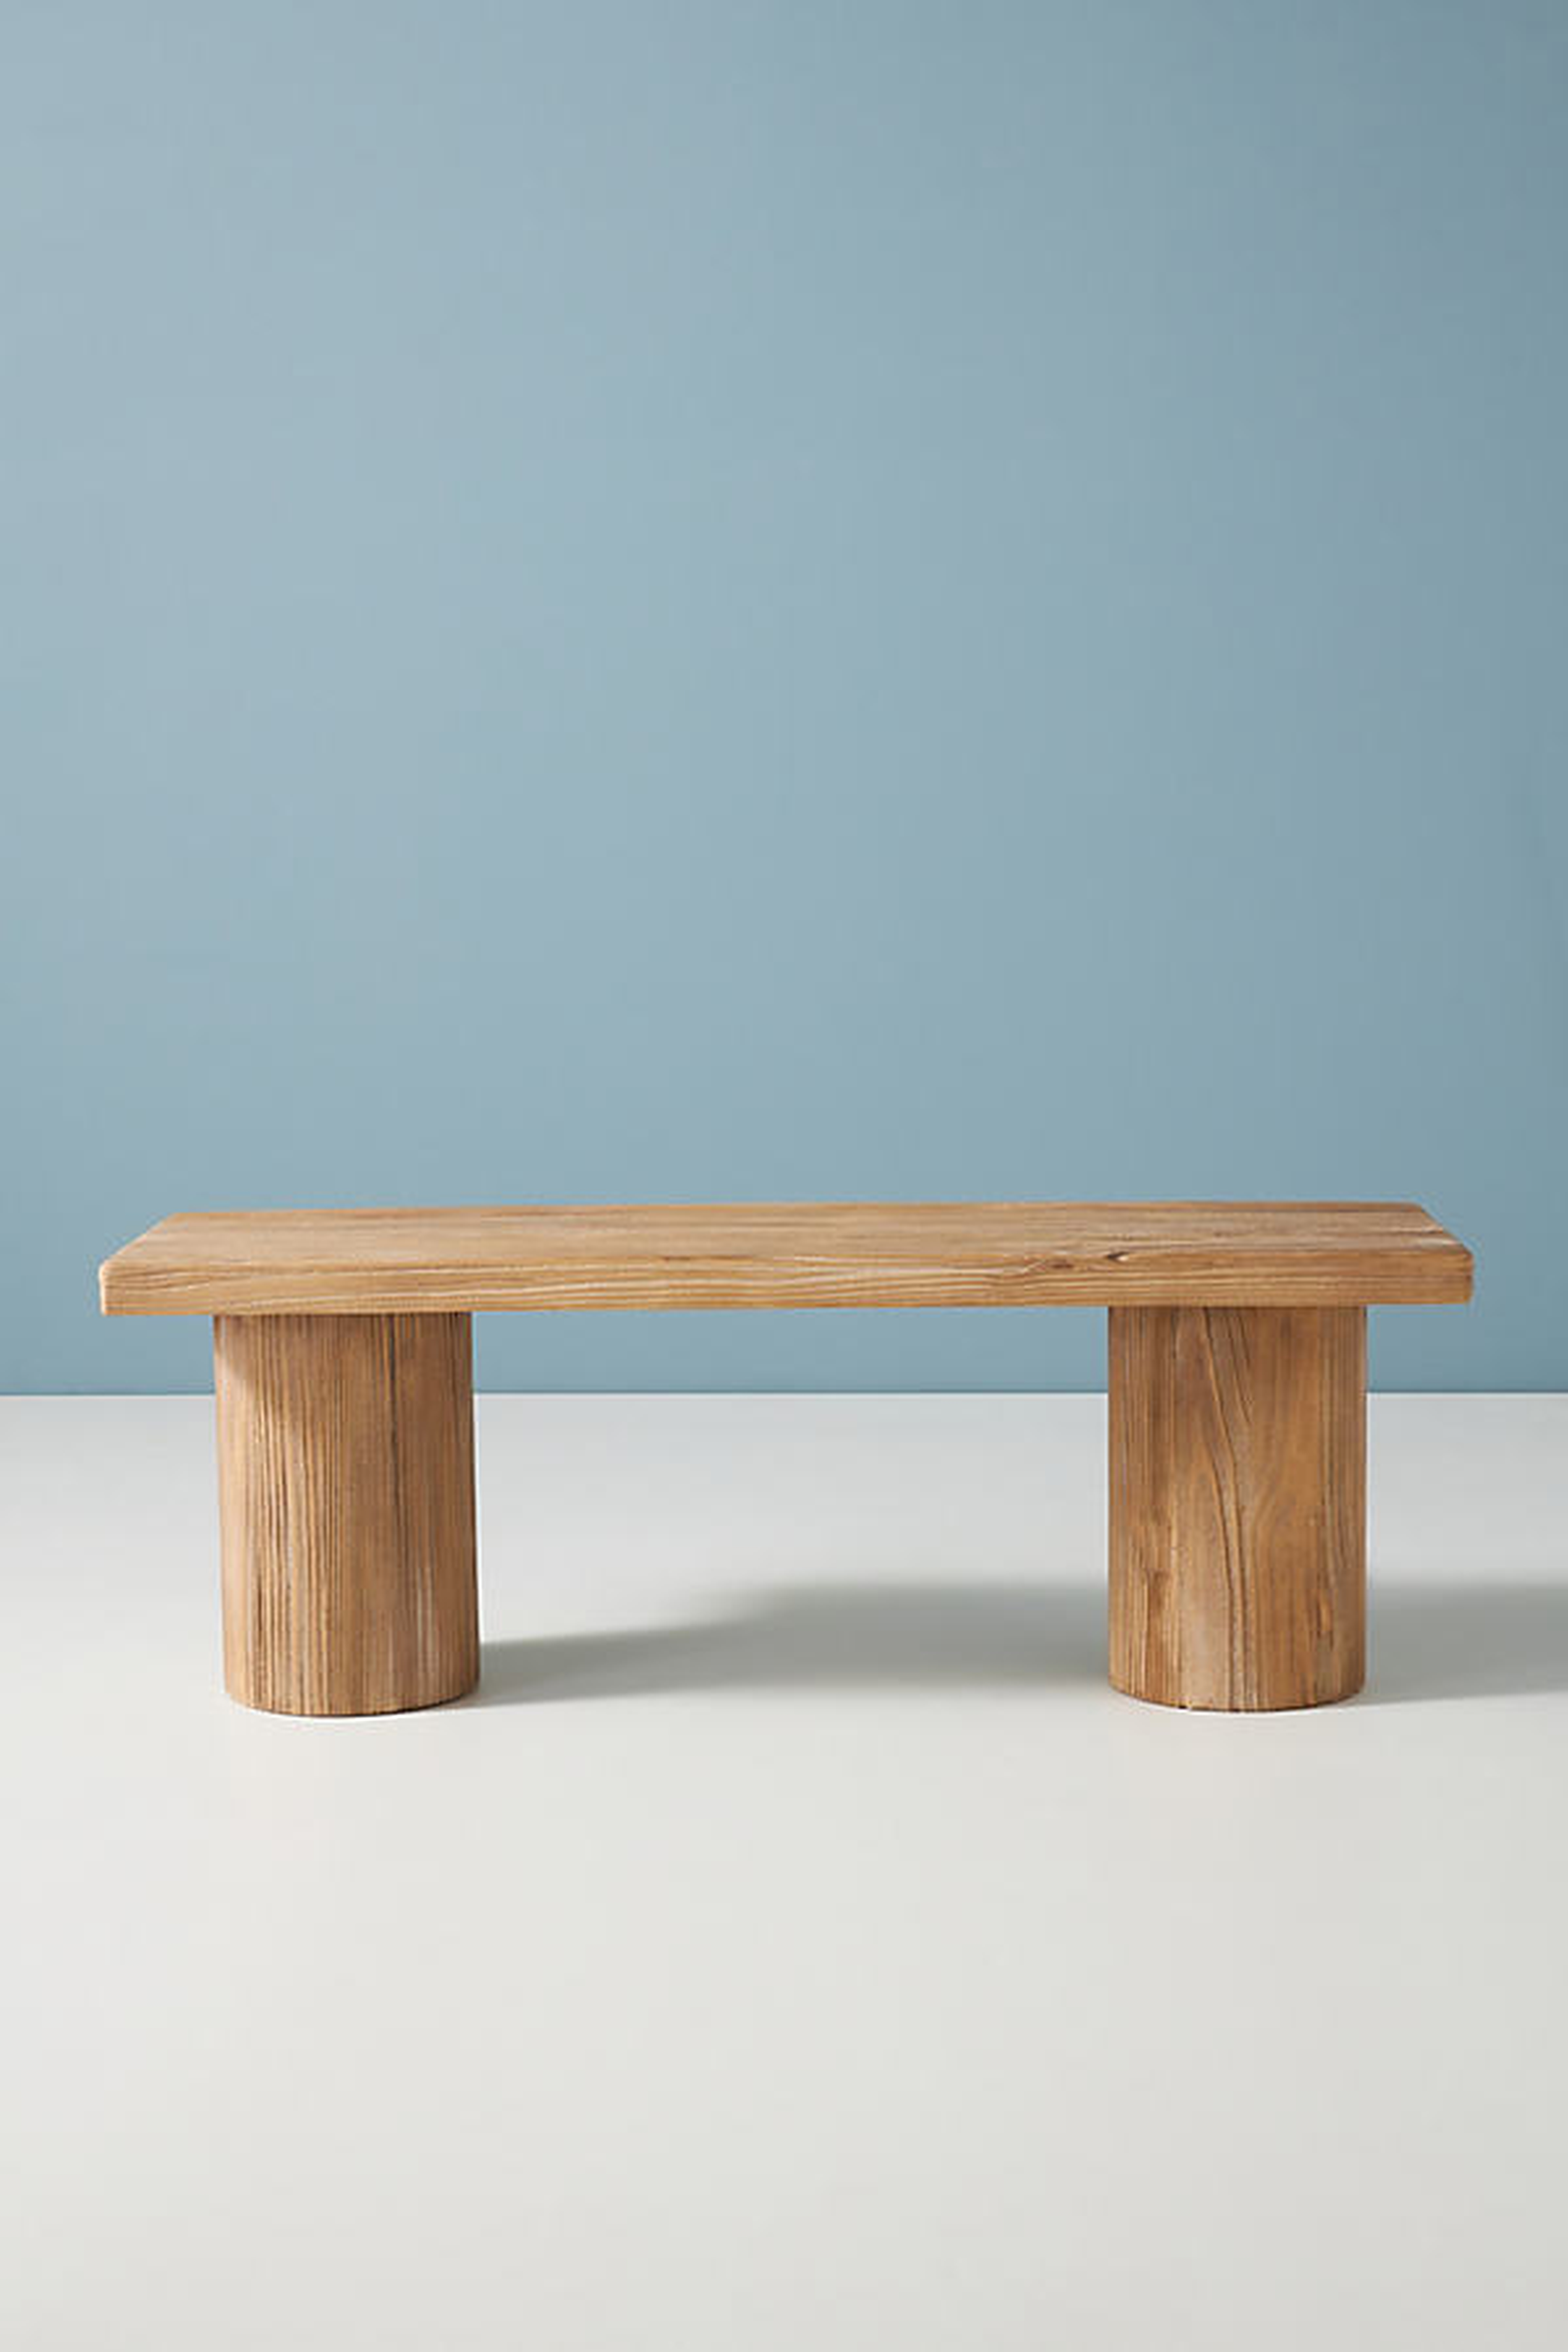 Margate Reclaimed Wood Bench By Anthropologie in Beige - Anthropologie